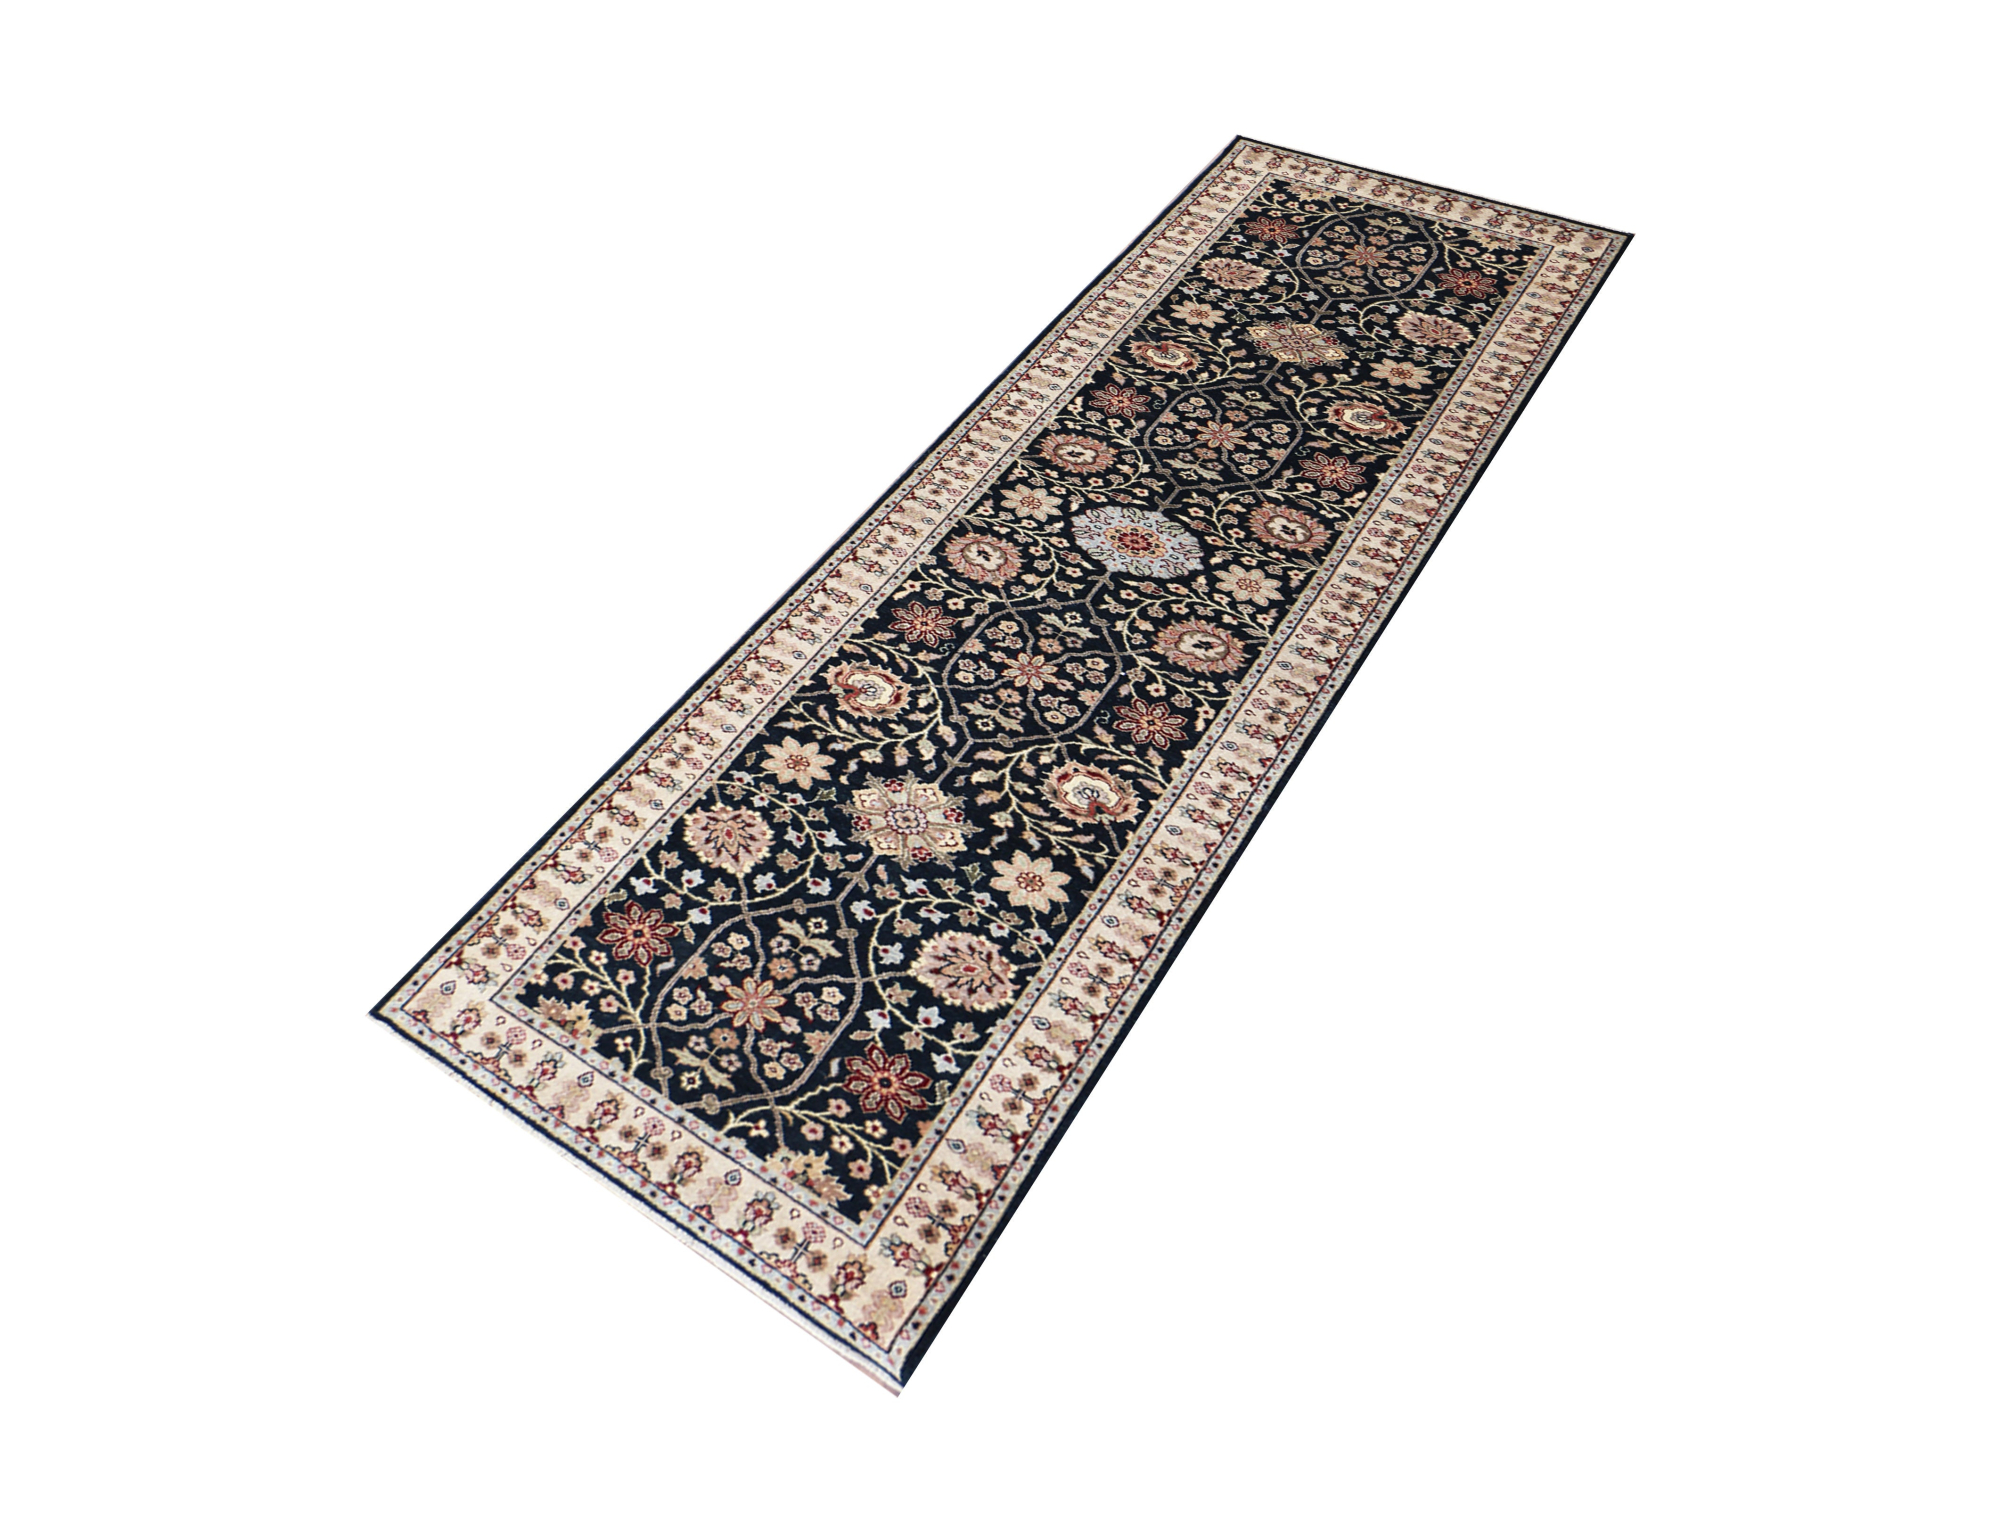 Ellora Indo Persian Black Hand Knotted Runner Rug 2'6